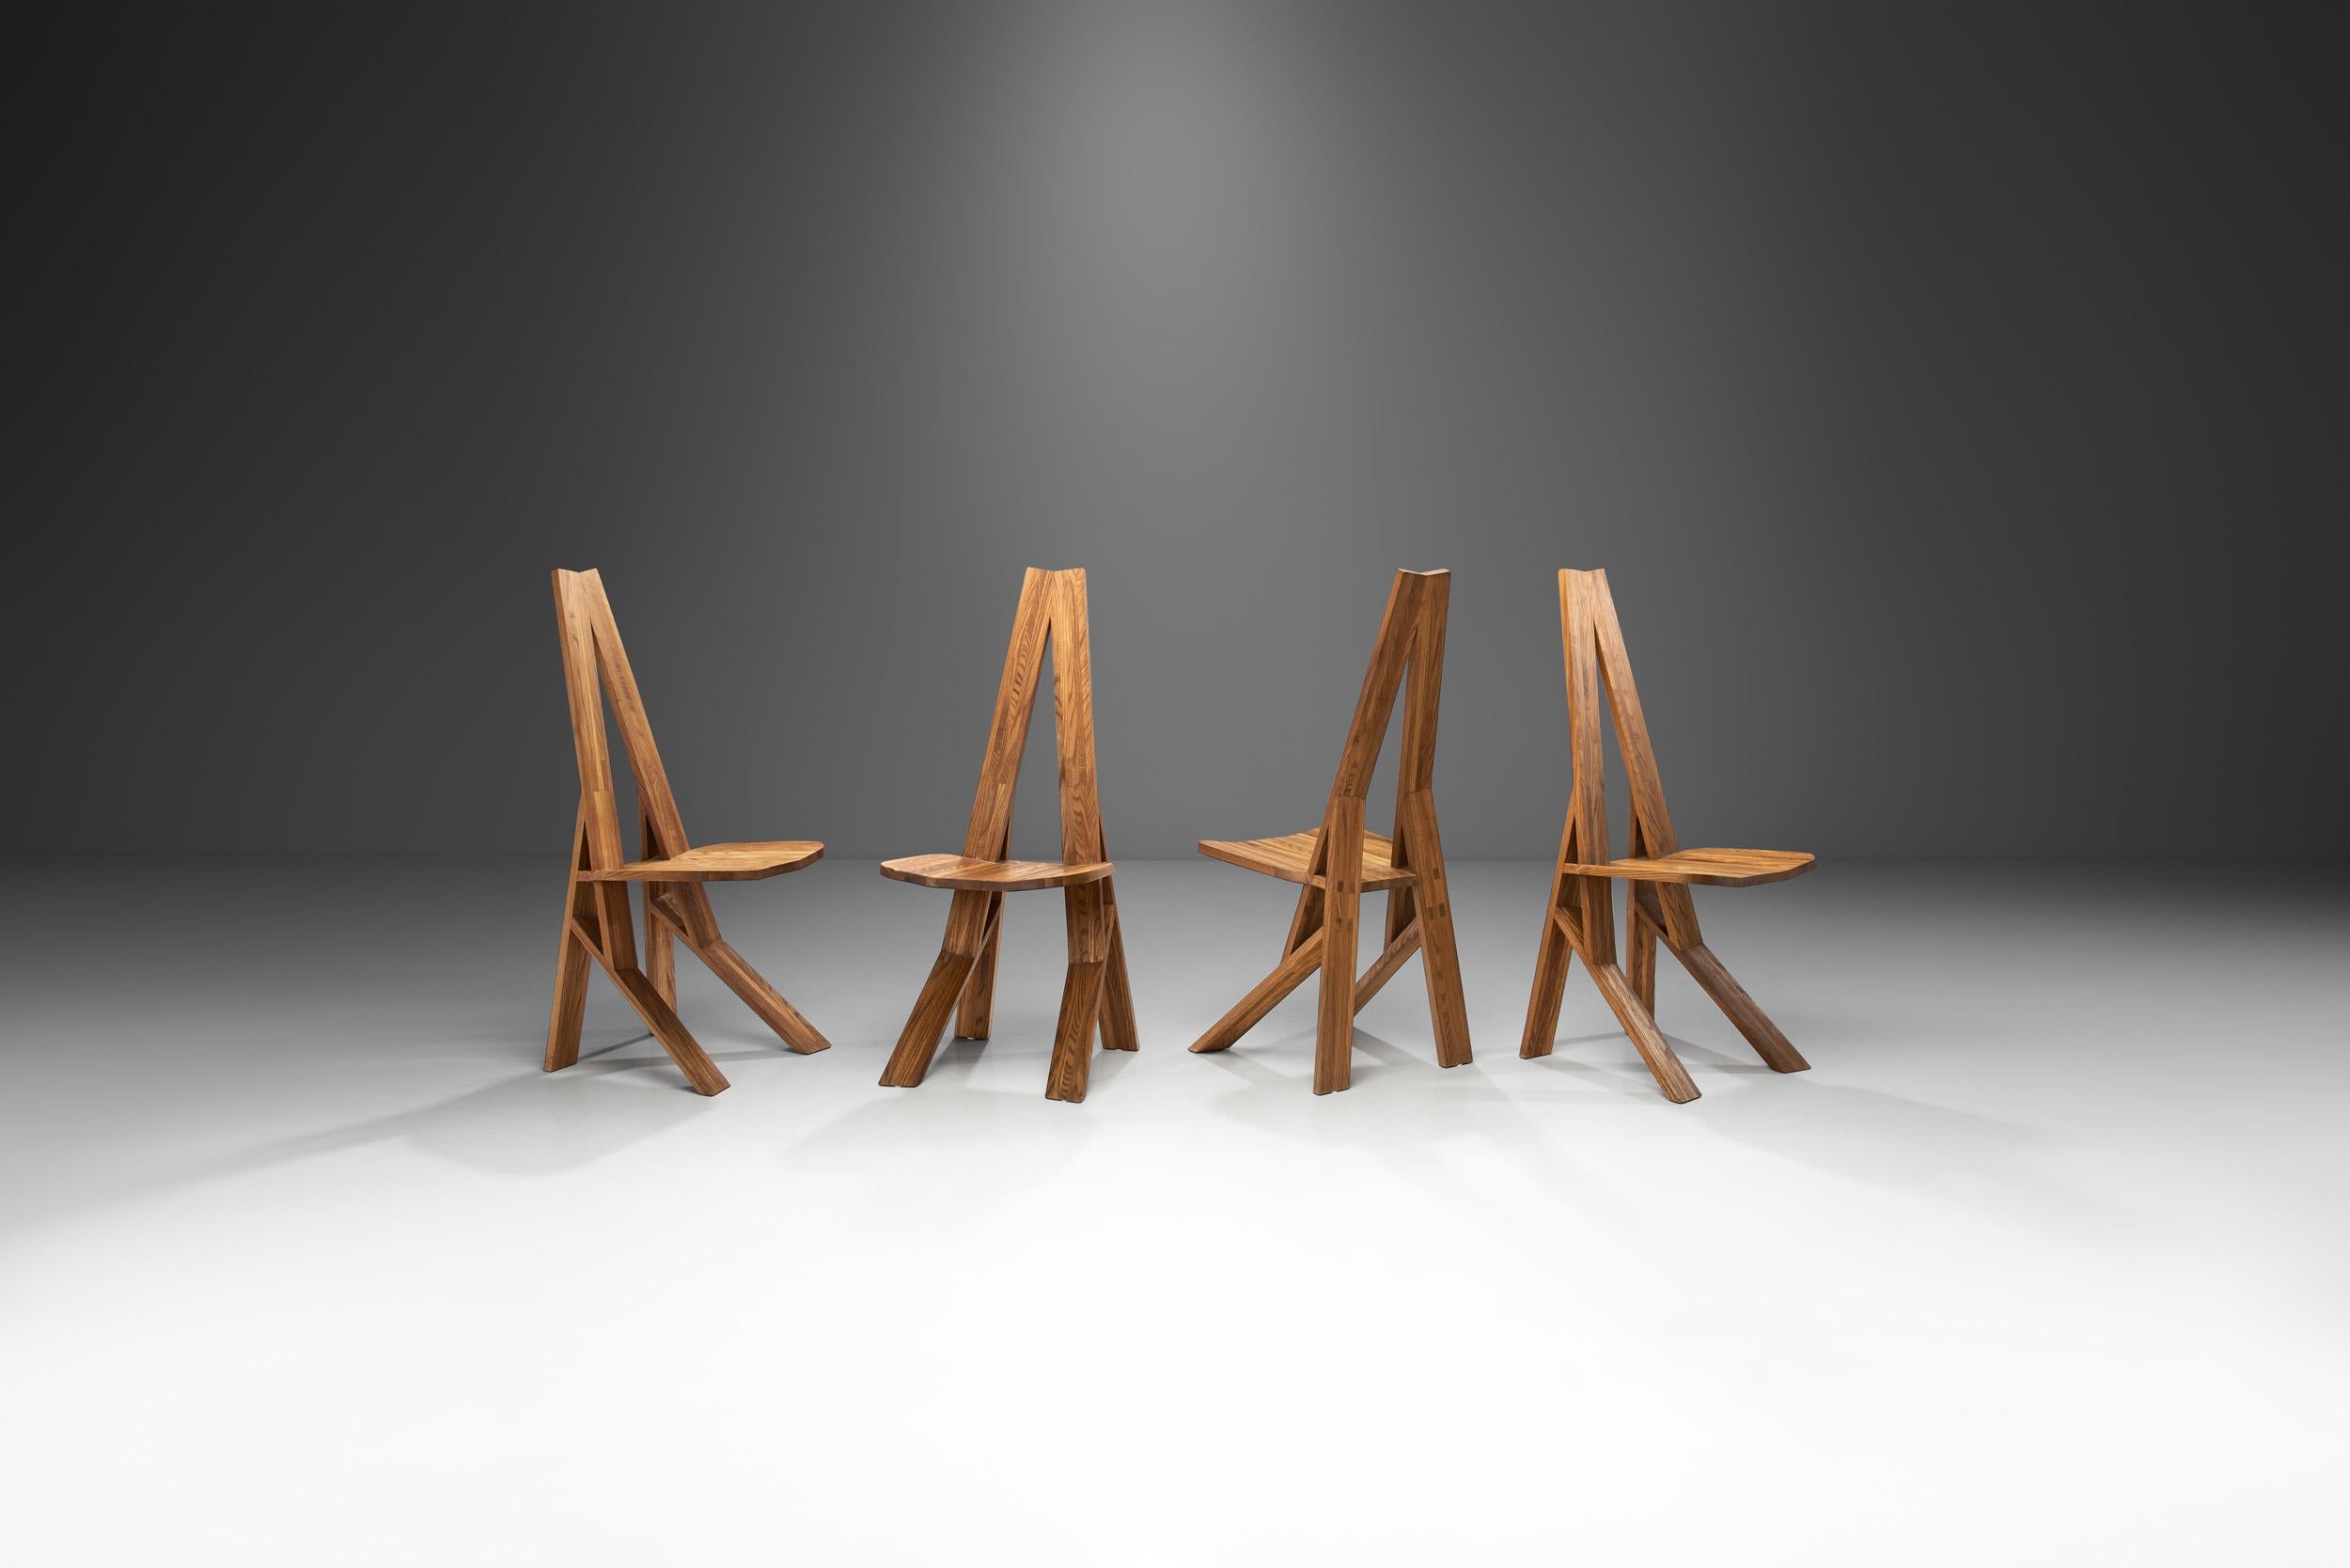 Designer and woodworker Pierre Chapo was an iconic French designer, who created timeless furniture that fused modern design with traditional craftsmanship. Among his loyal clientele was the playwright Samuel Beckett among others.

Chapo initially